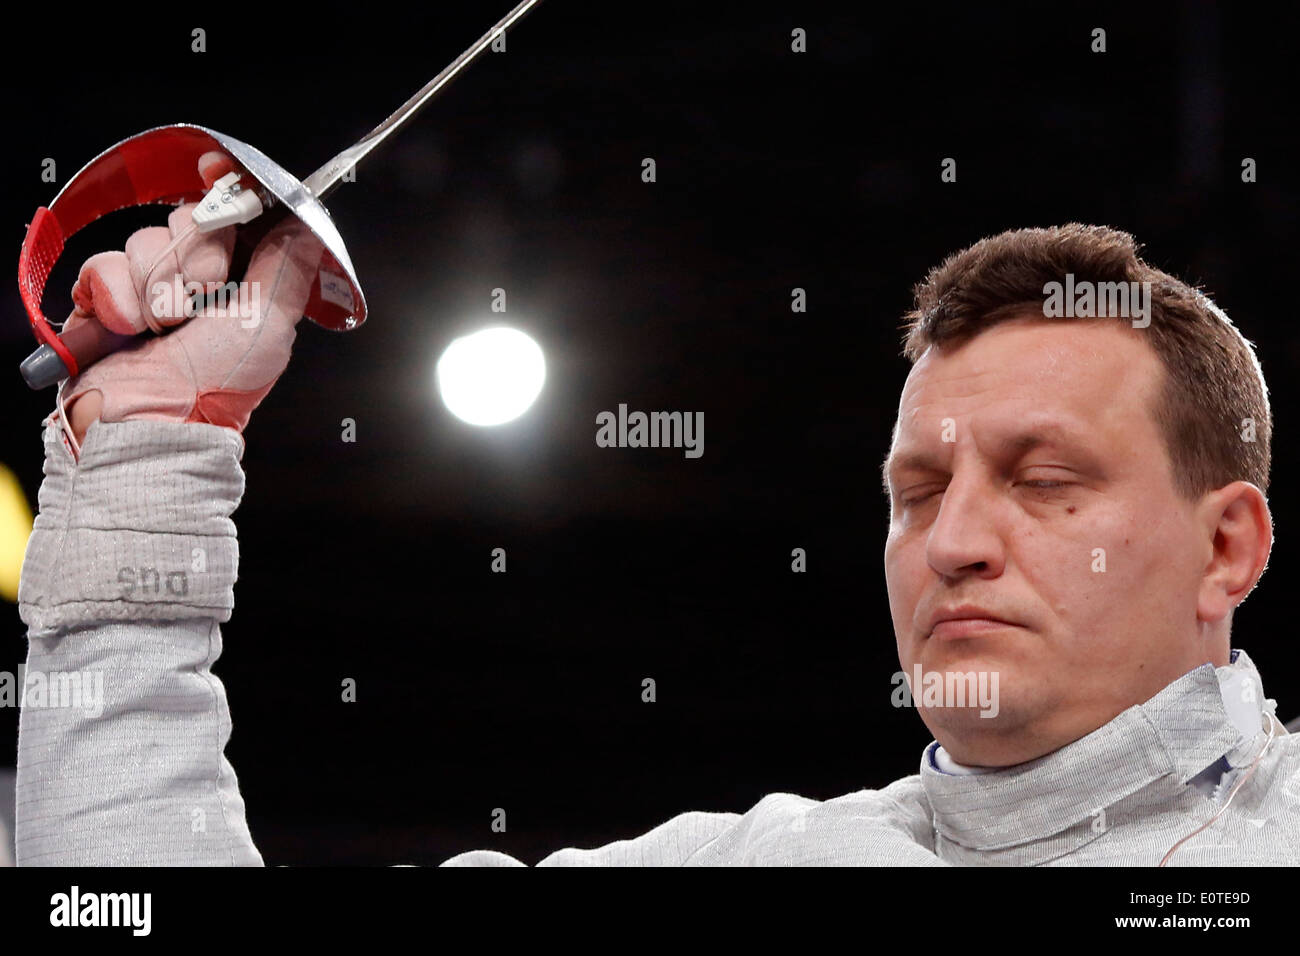 Radoslaw Stanczuk of Poland competes during the Men's Individual Sabre - Category A wheelchair fencing at the Excel Center during the London 2012 Paralympic Games in London, Britain, 06 September 2012. Stock Photo